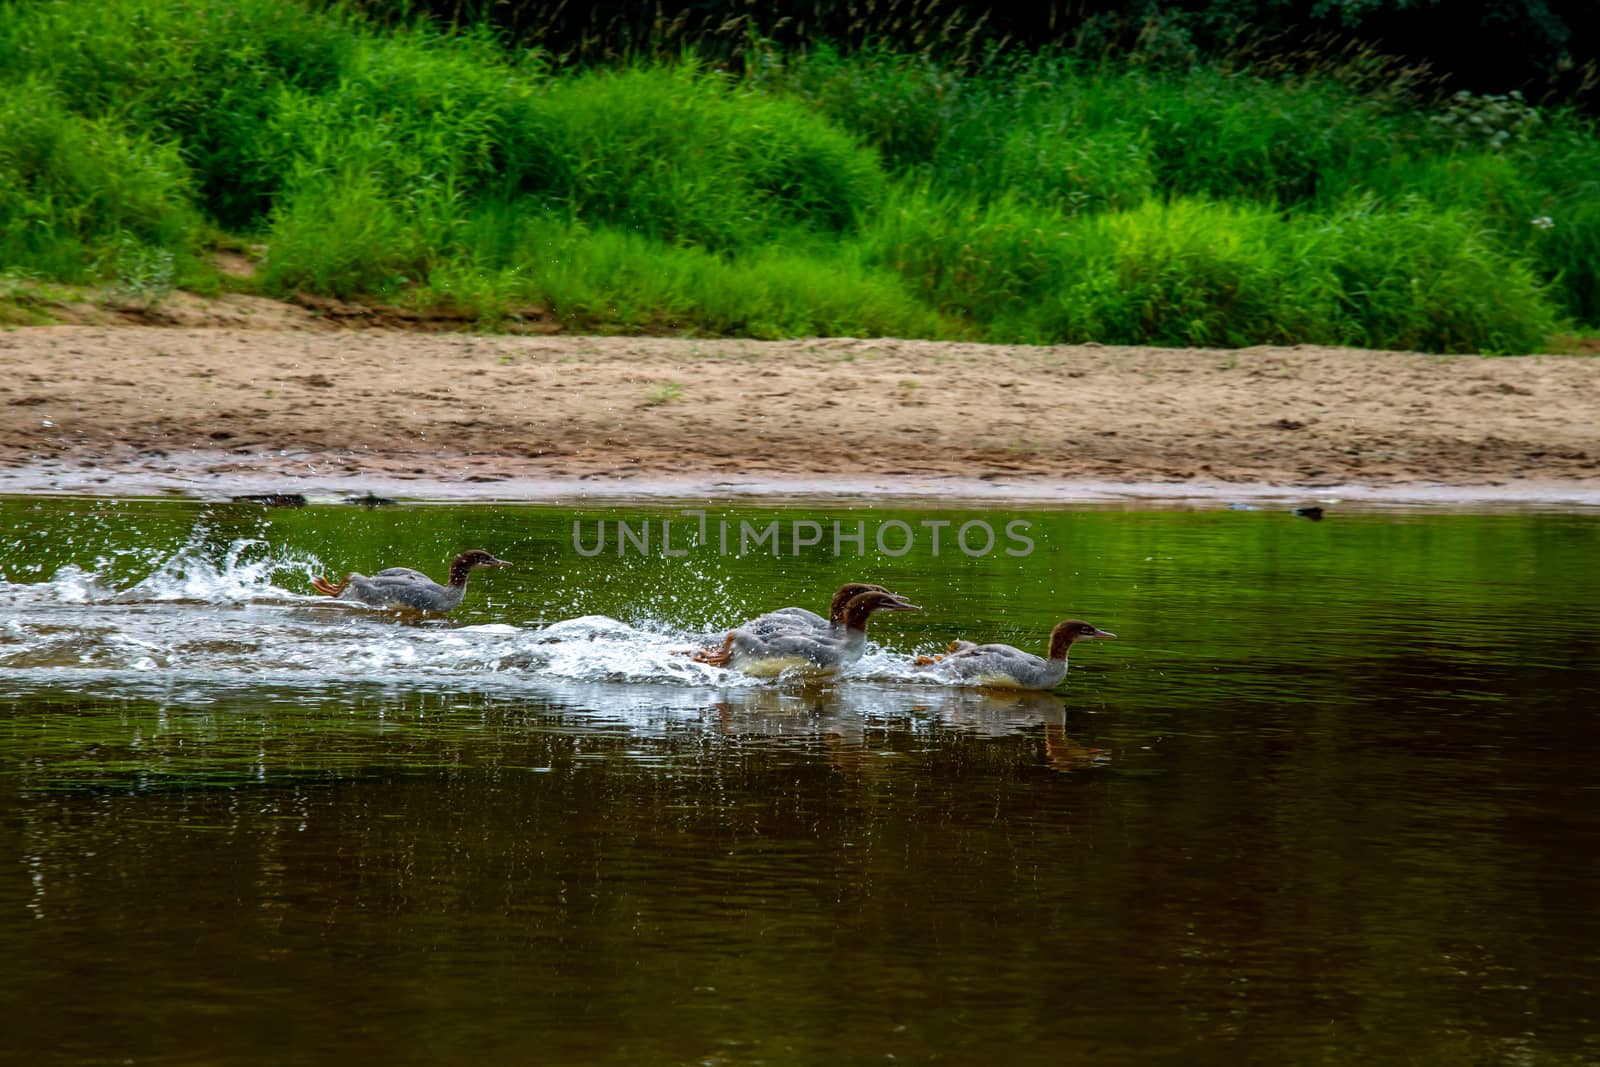 Ducks swimming in the river in Latvia by fotorobs